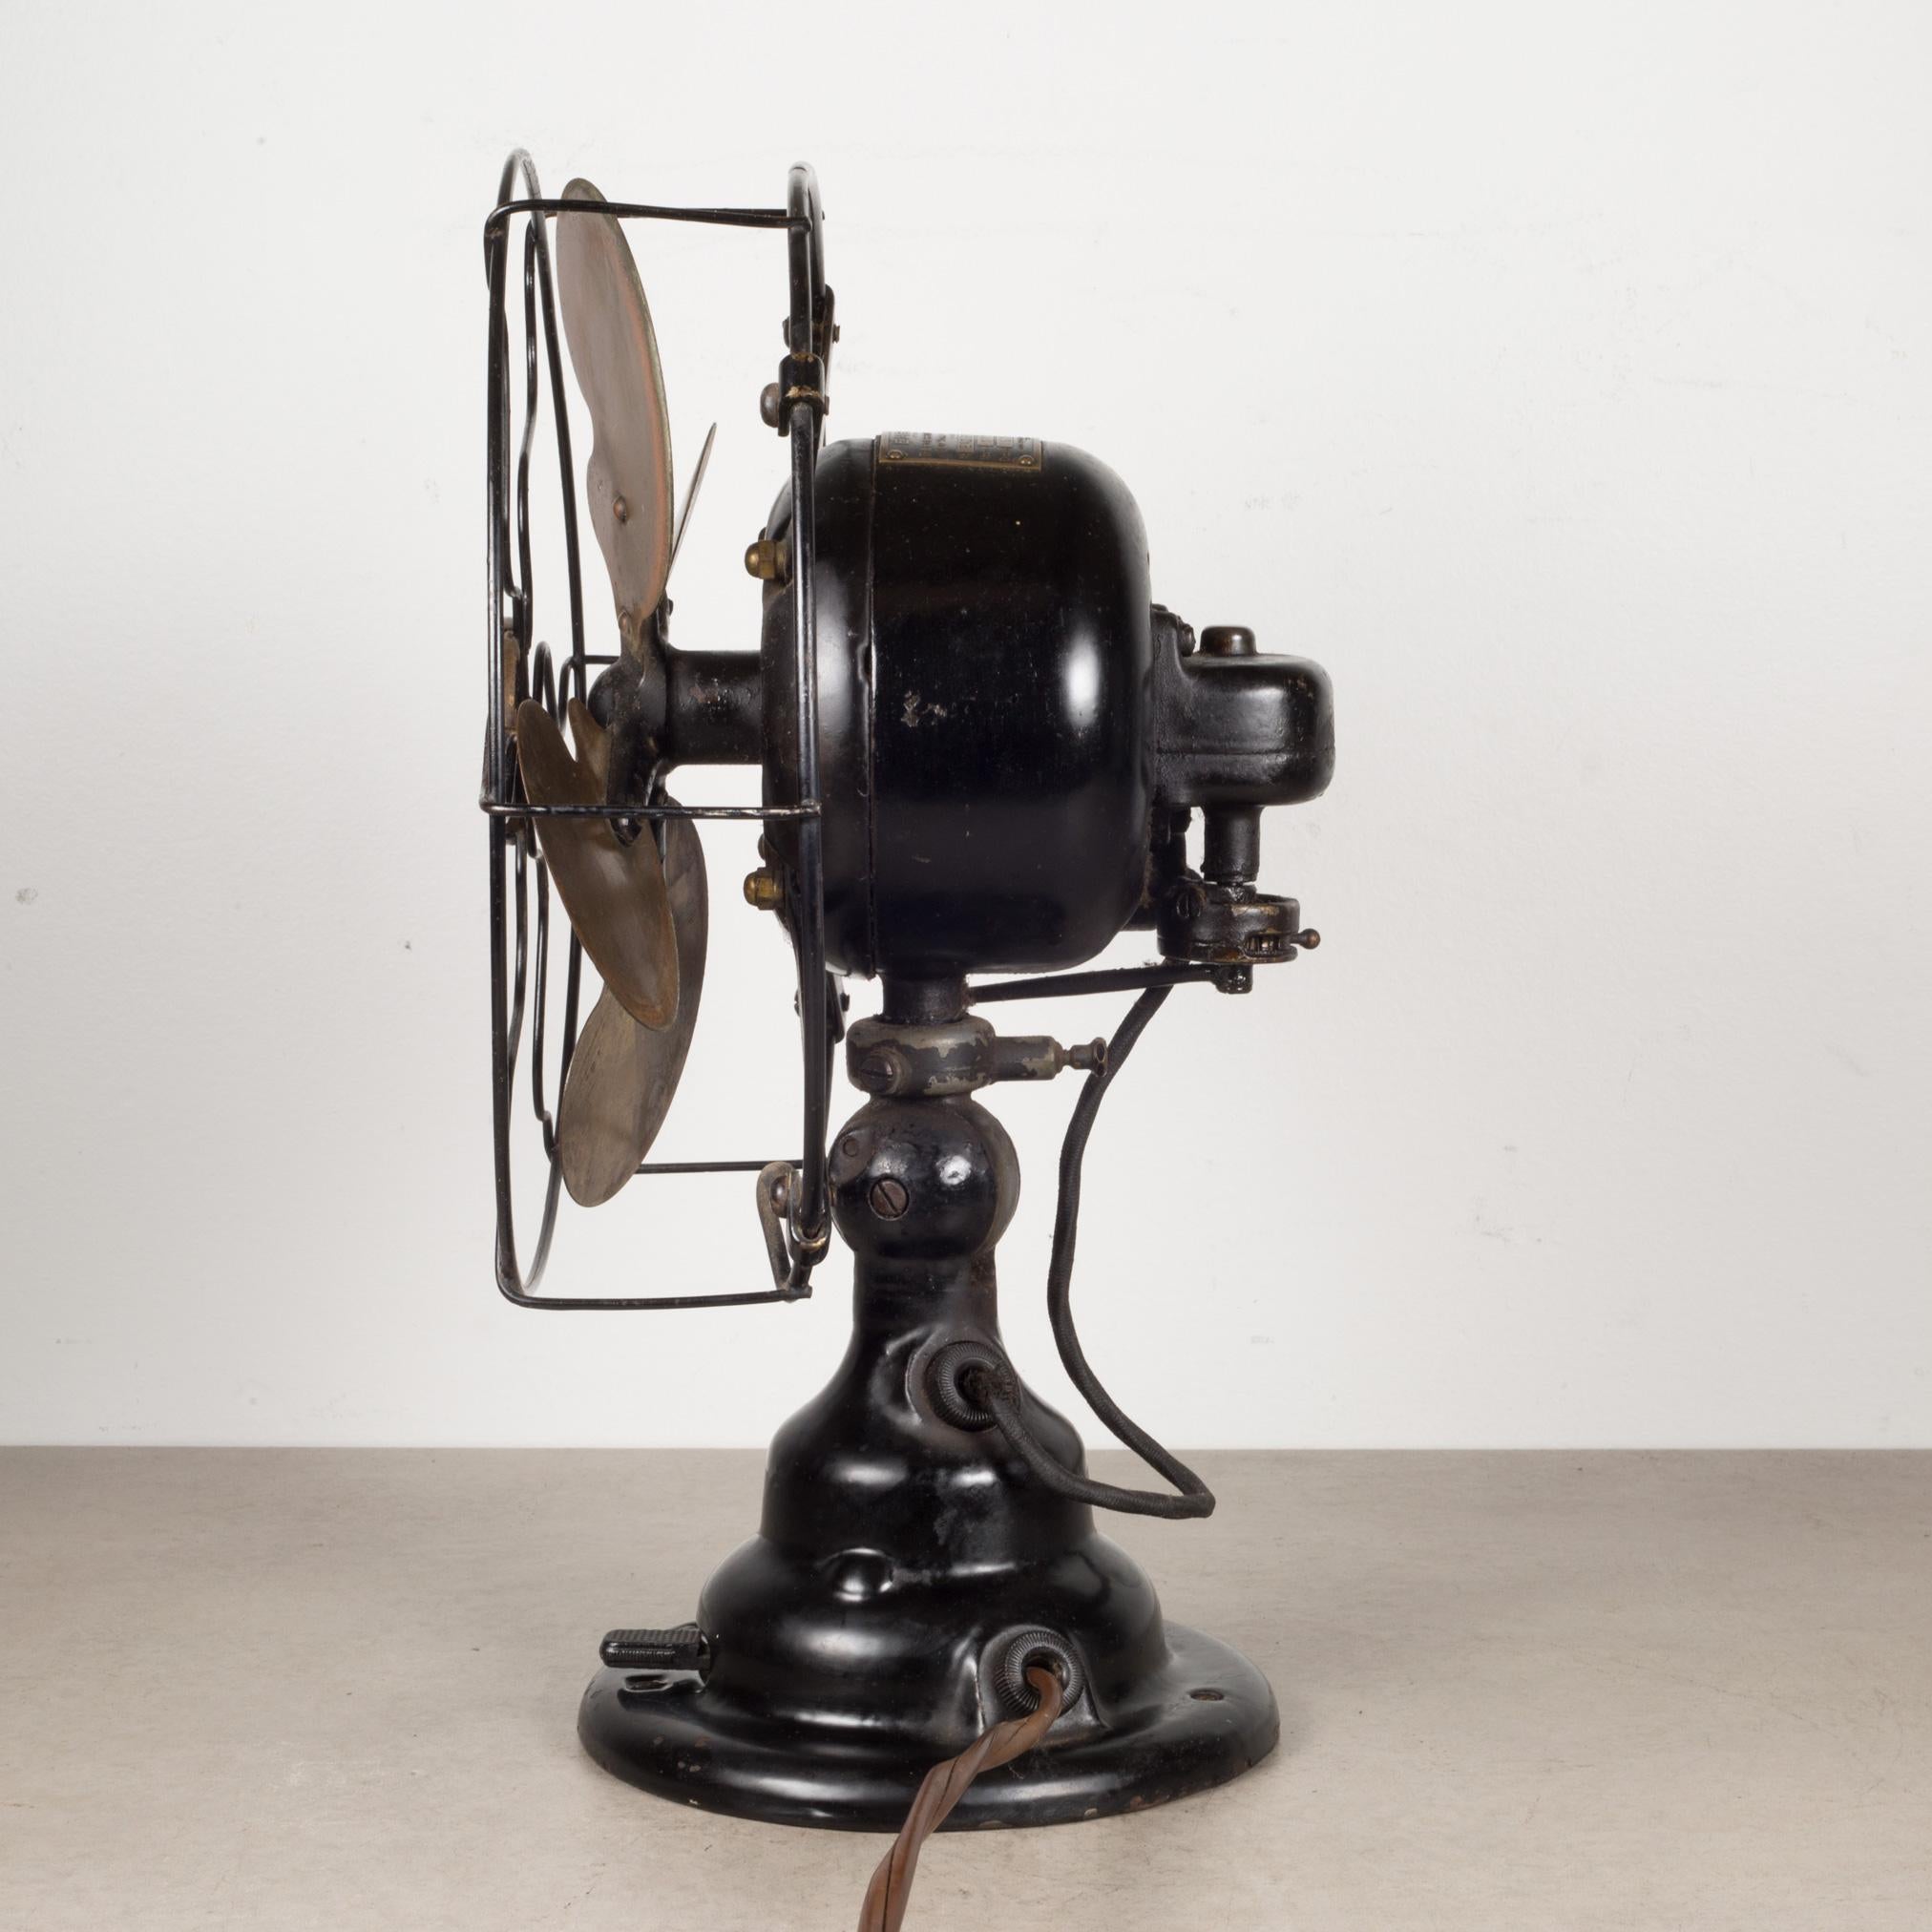 American Vintage Cast Iron and Brass Emerson Electric Oscillating Fan, c.1930